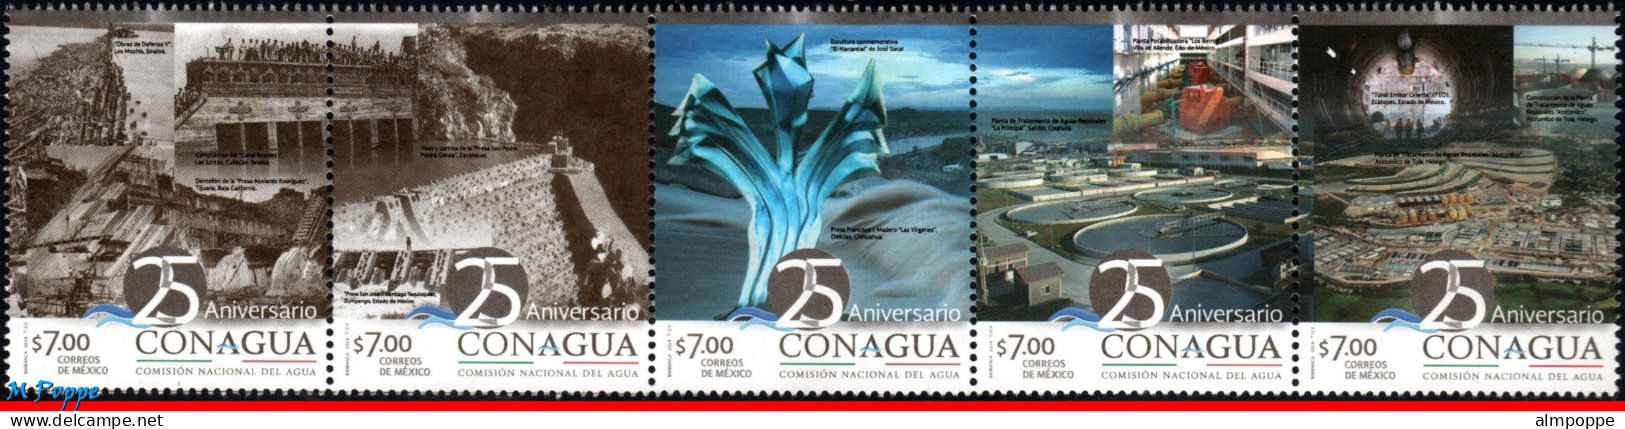 Ref. MX-2859 MEXICO 2014 - CONAGUA, 25TH ANNIV., NTLWATER COMMISSION, WATER DAMS, SET MNH, INDUSTRY 5V Sc# 2859 - Eau